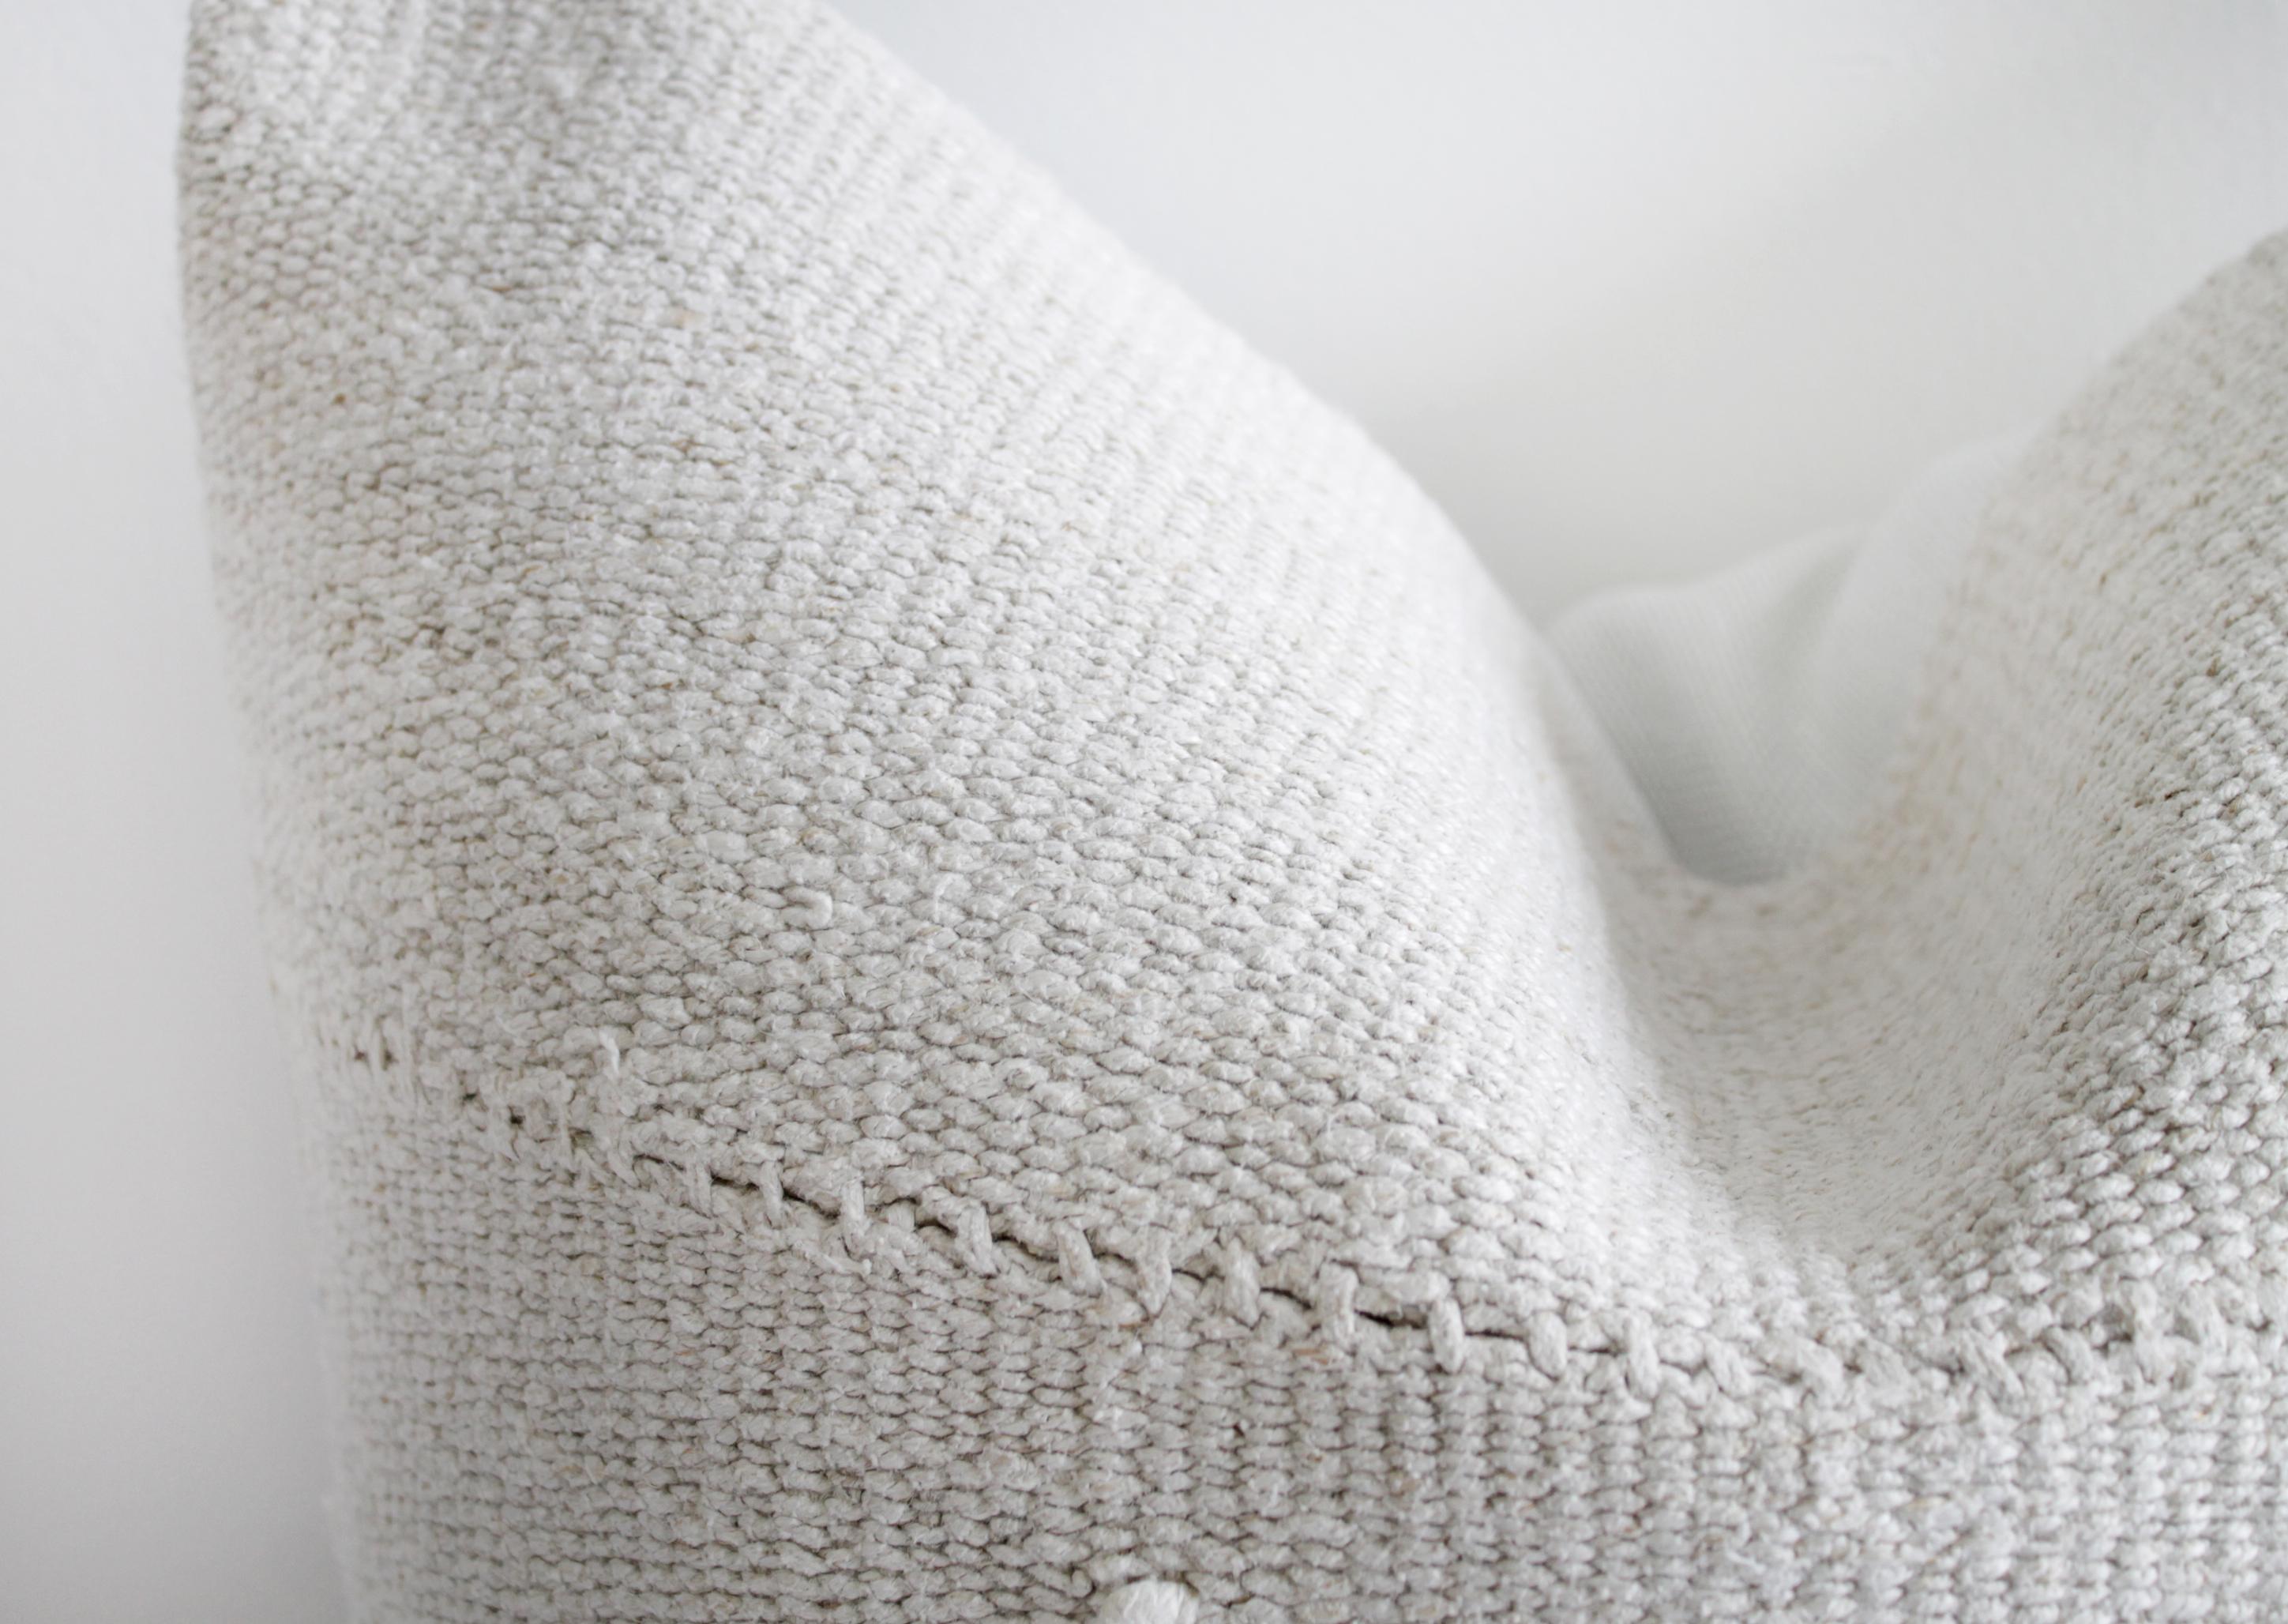 Vintage nubby handwoven Minimalist style pillow
Color: White
Original stitched seam, hidden zipper closure.
Insert not included.
 